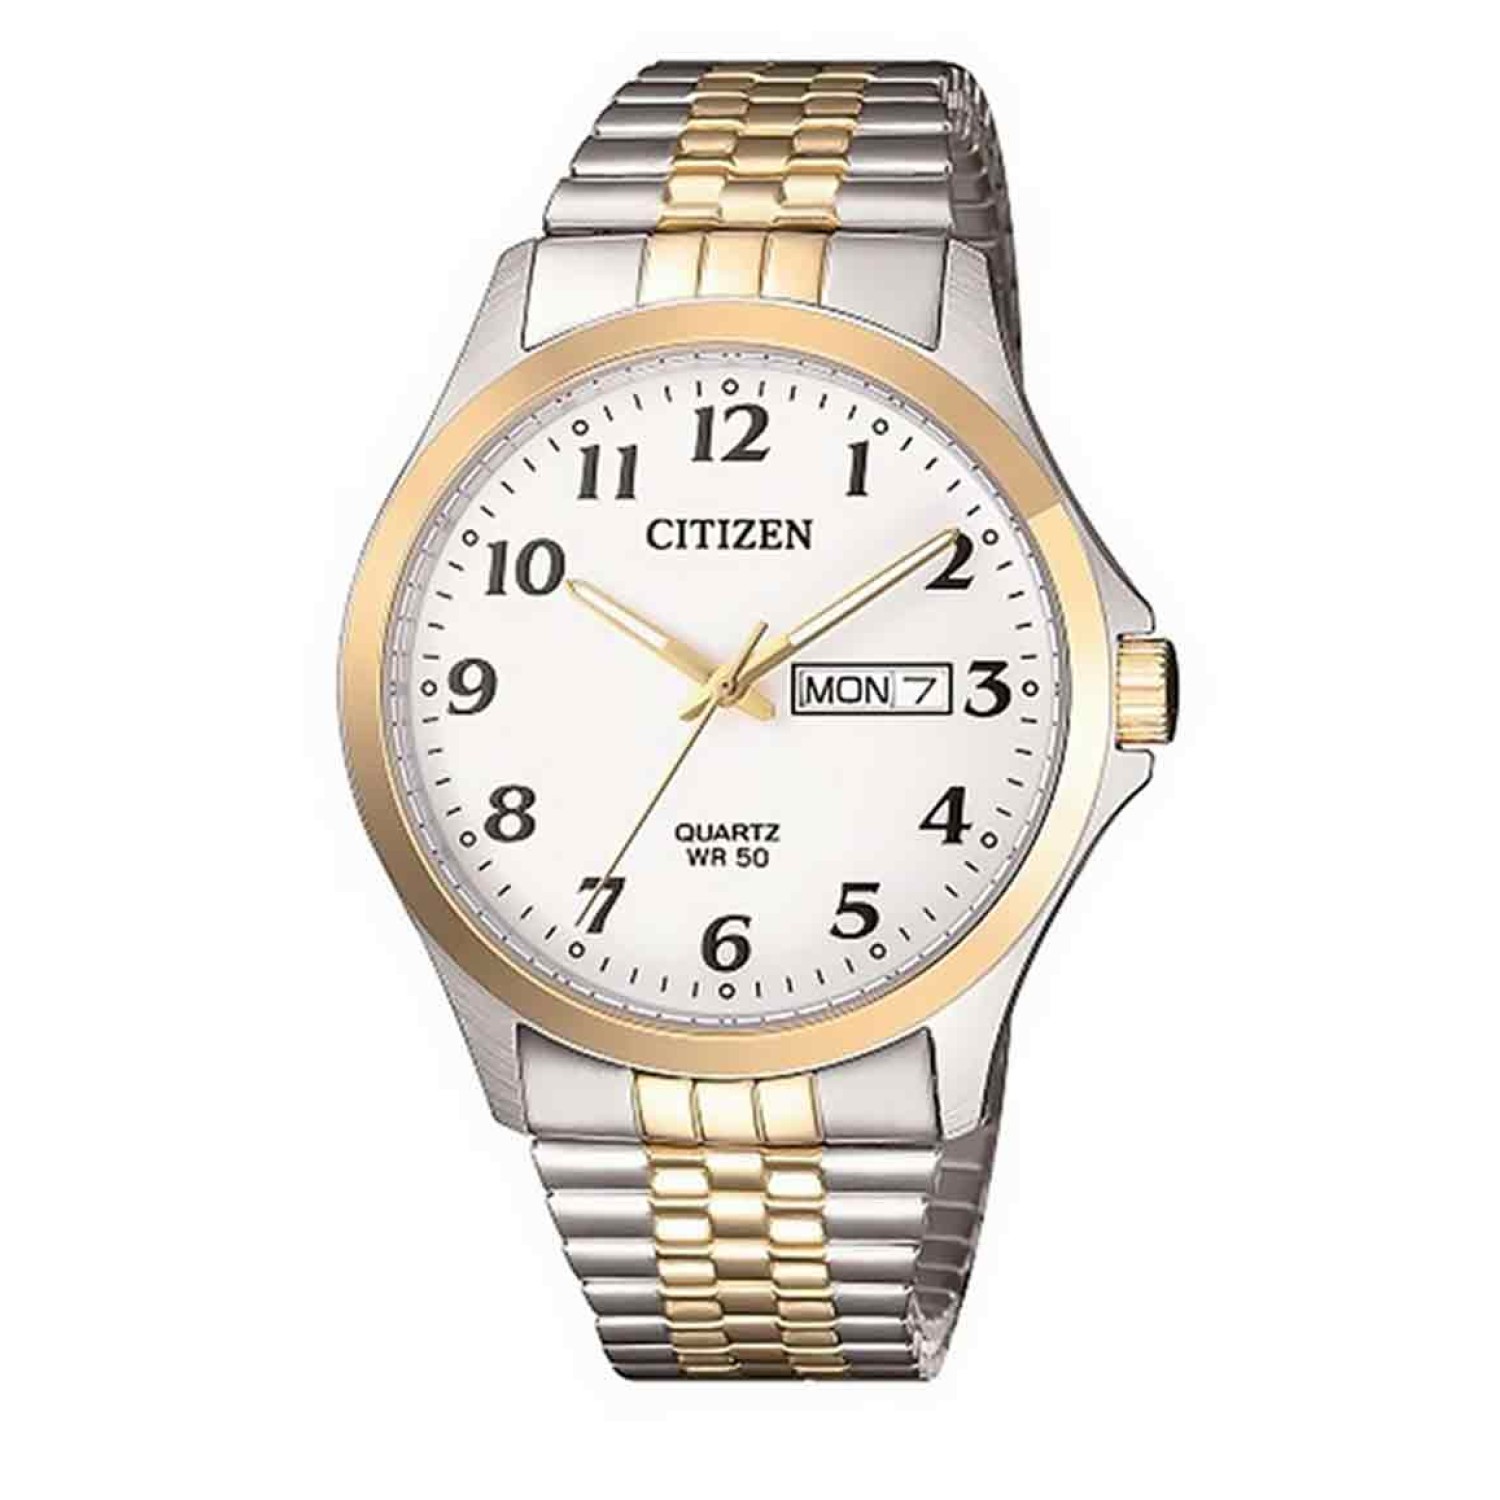 BF5004-93A Citizen Mens Stainless Steel  Watch. Distinguished in appearance, it features ivory white face with day/date display enveloped by a gold coloured bezel and tough gold plated stainless steel case and band.